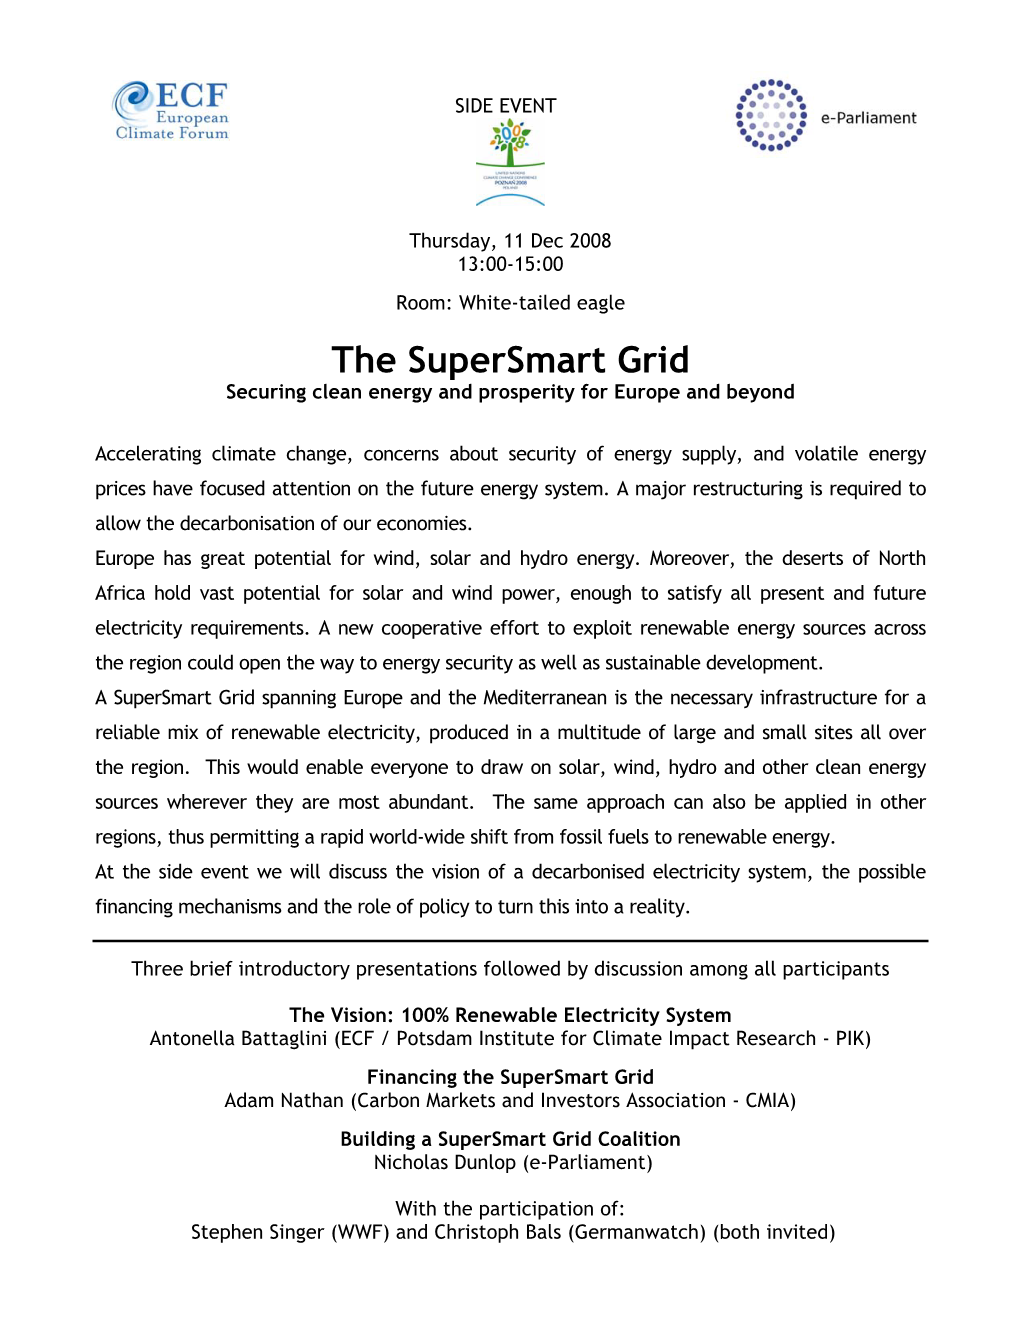 The Supersmart Grid Securing Clean Energy and Prosperity for Europe and Beyond